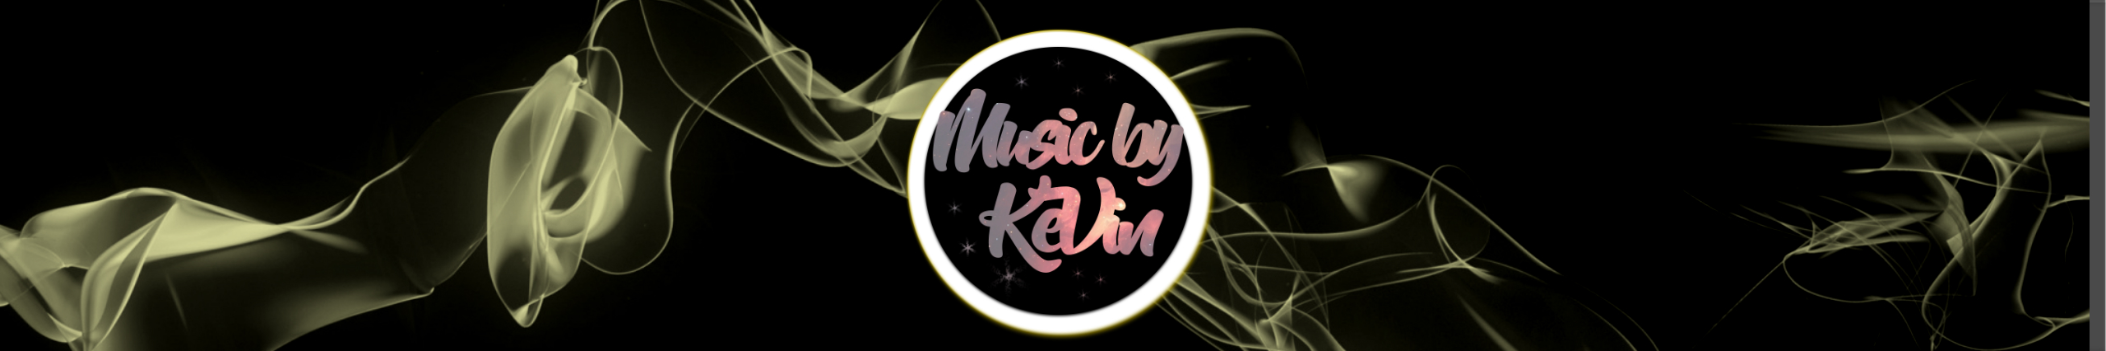 Music by KeVin